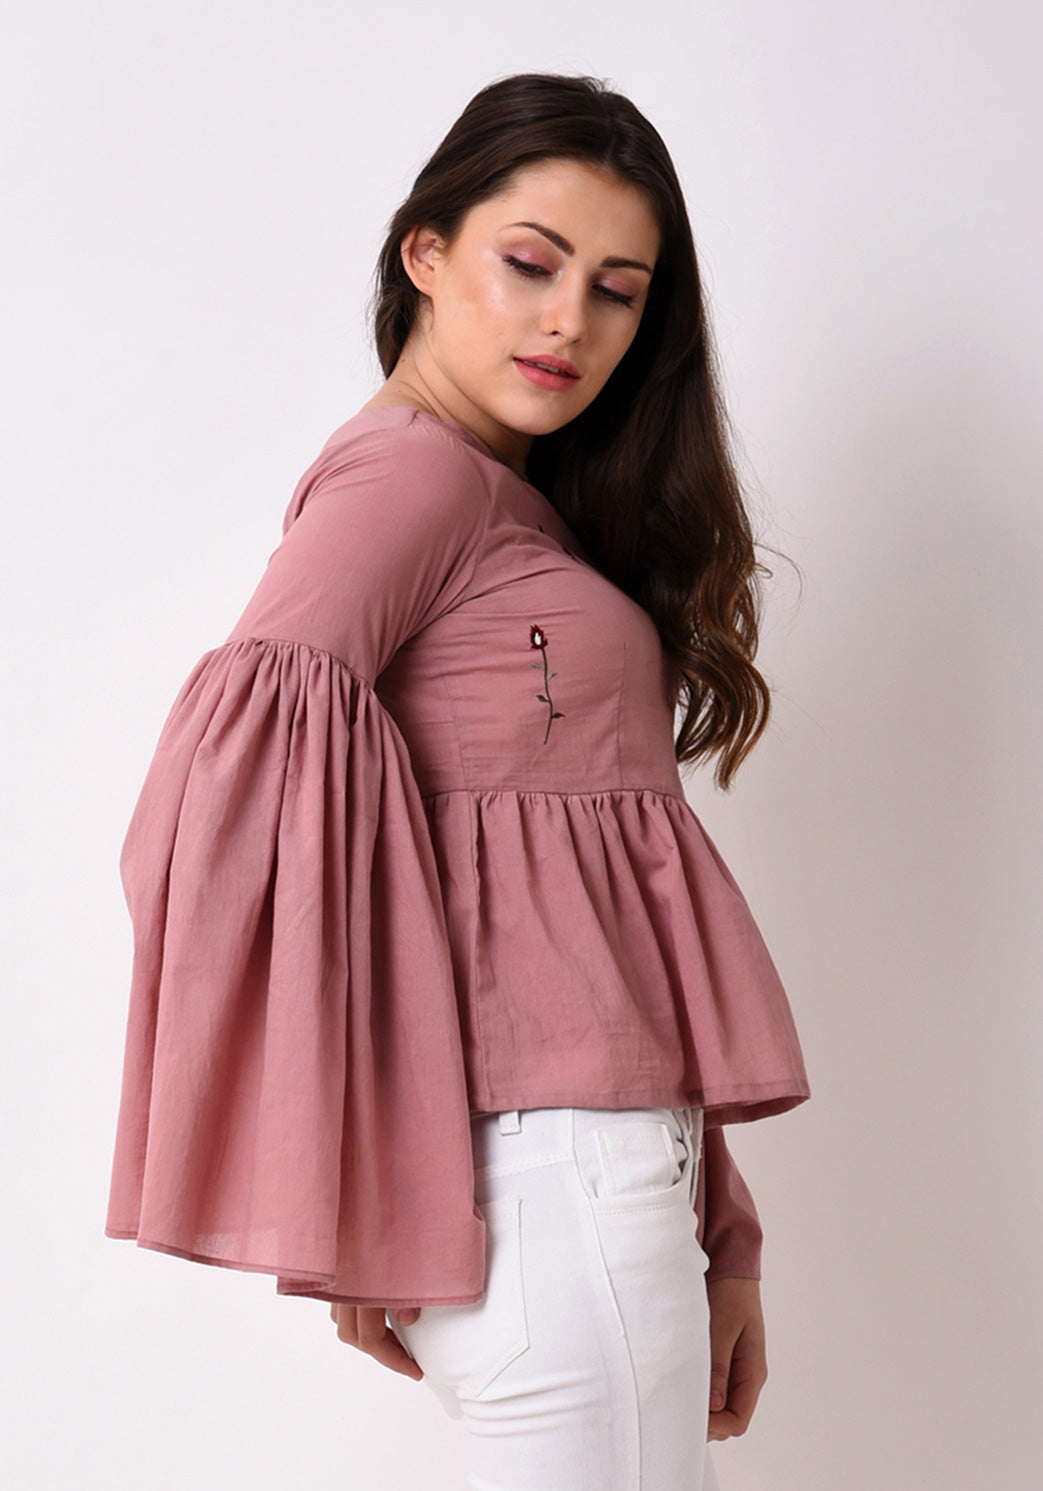 Gathered Flare Embroidered Top - Pale Blush